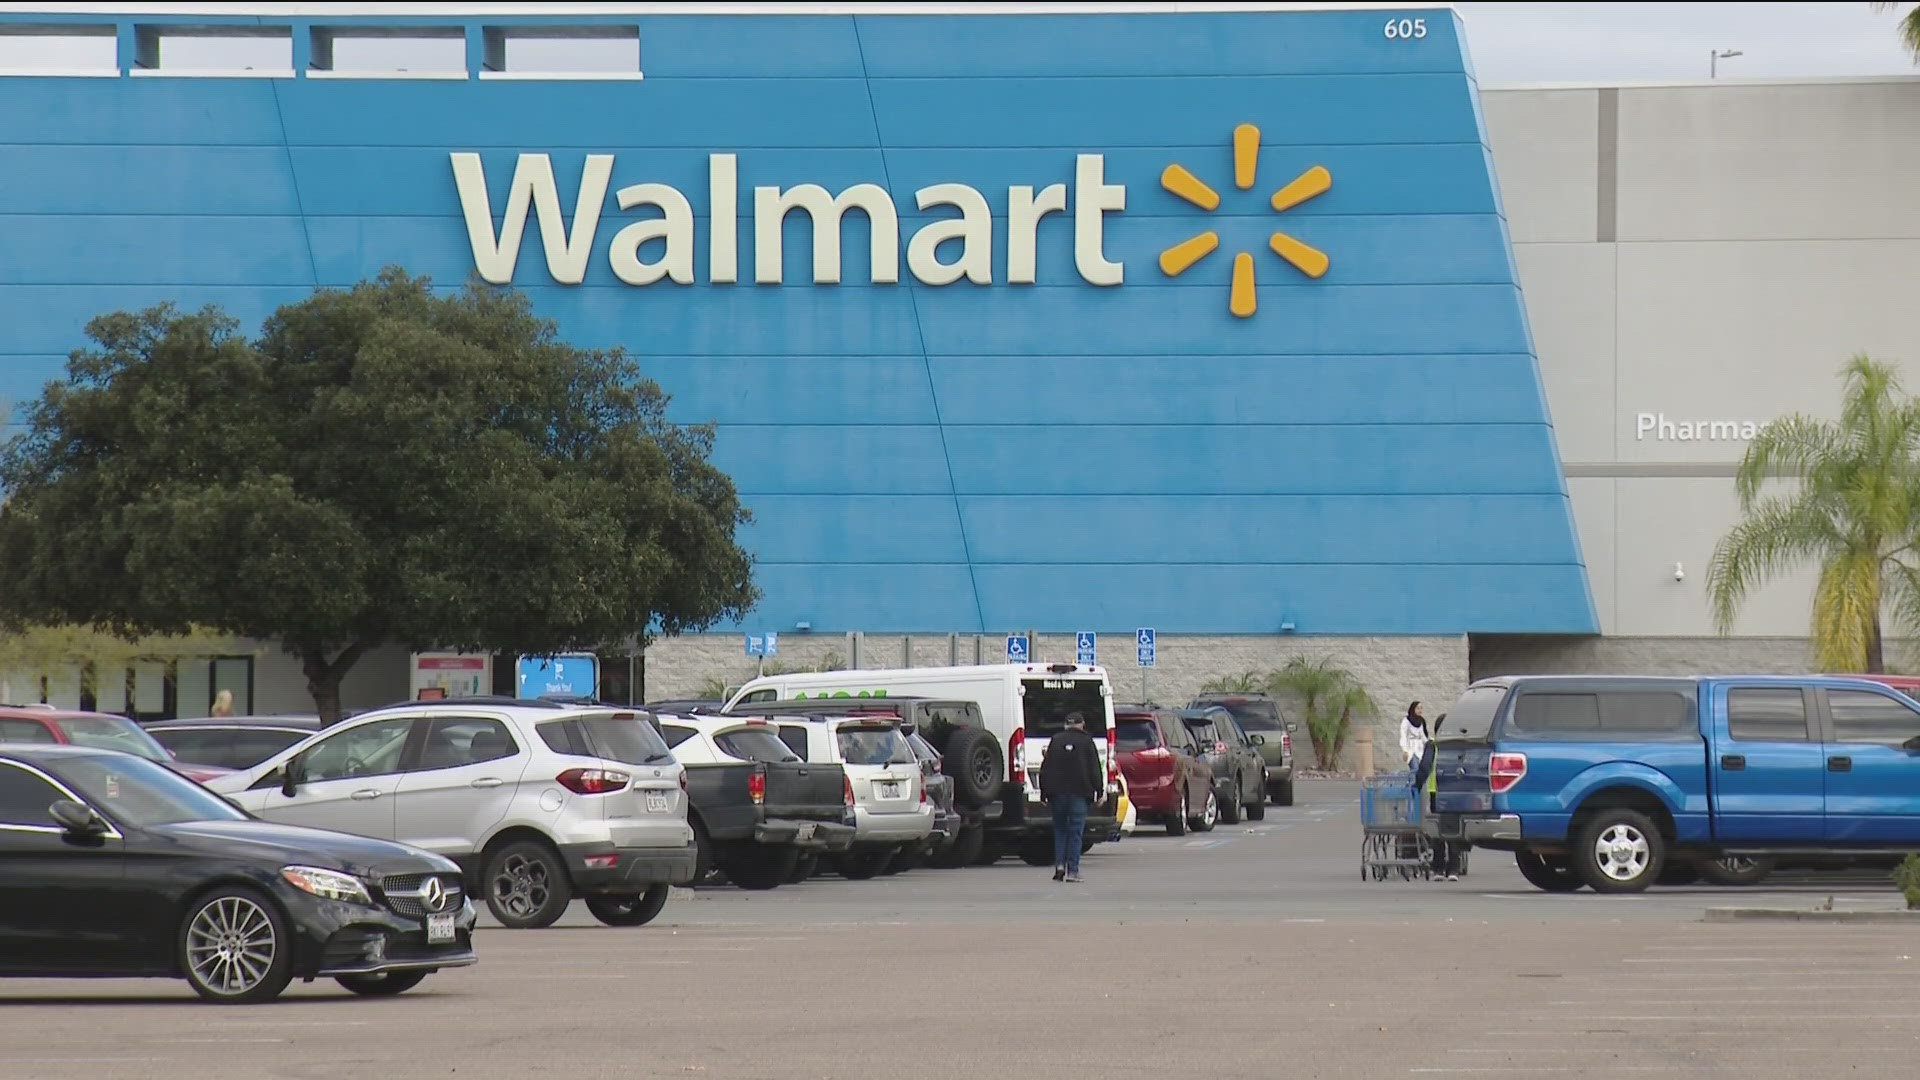 Walmart said there was no single cause for the two store closures but the decision was based on multiple factors including financial performance.